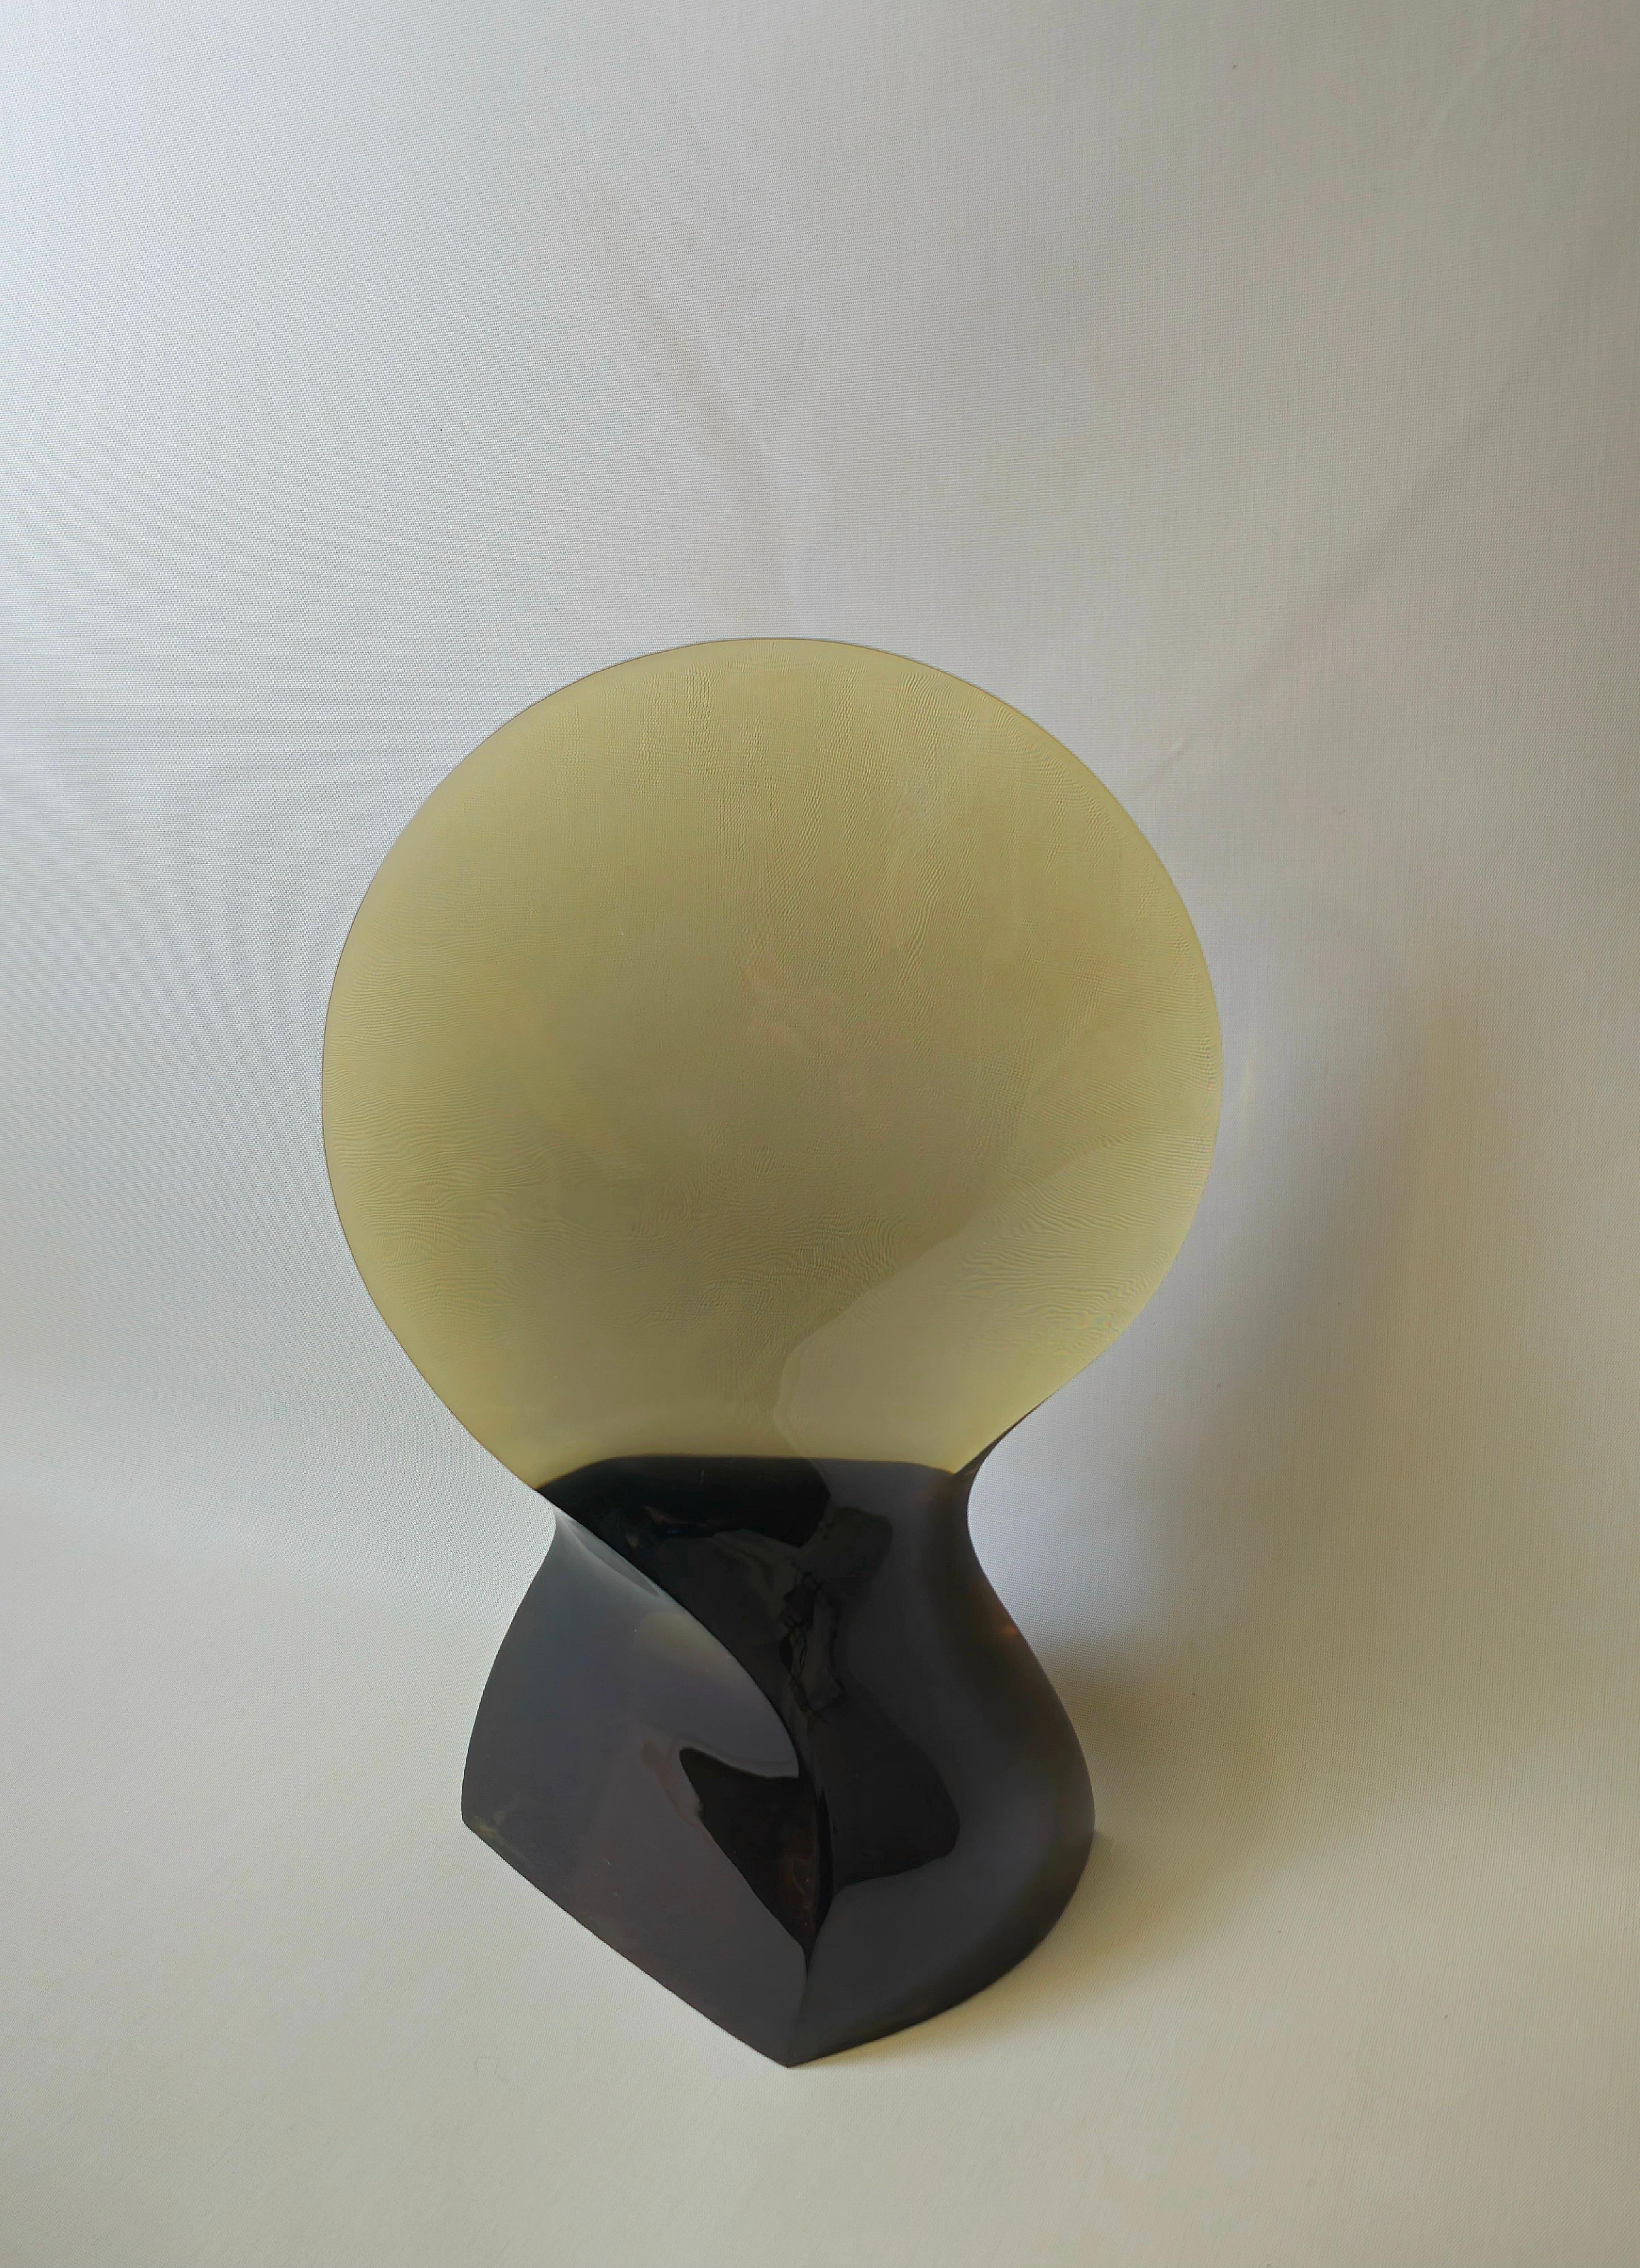 Very particular, rare and imposing multifaceted abstract sculpture by an unknown designer, made of translucent resin with a two-tone effect. Produced in the 80s. Excellent quality and workmanship.



Note: We try to offer our customers an excellent